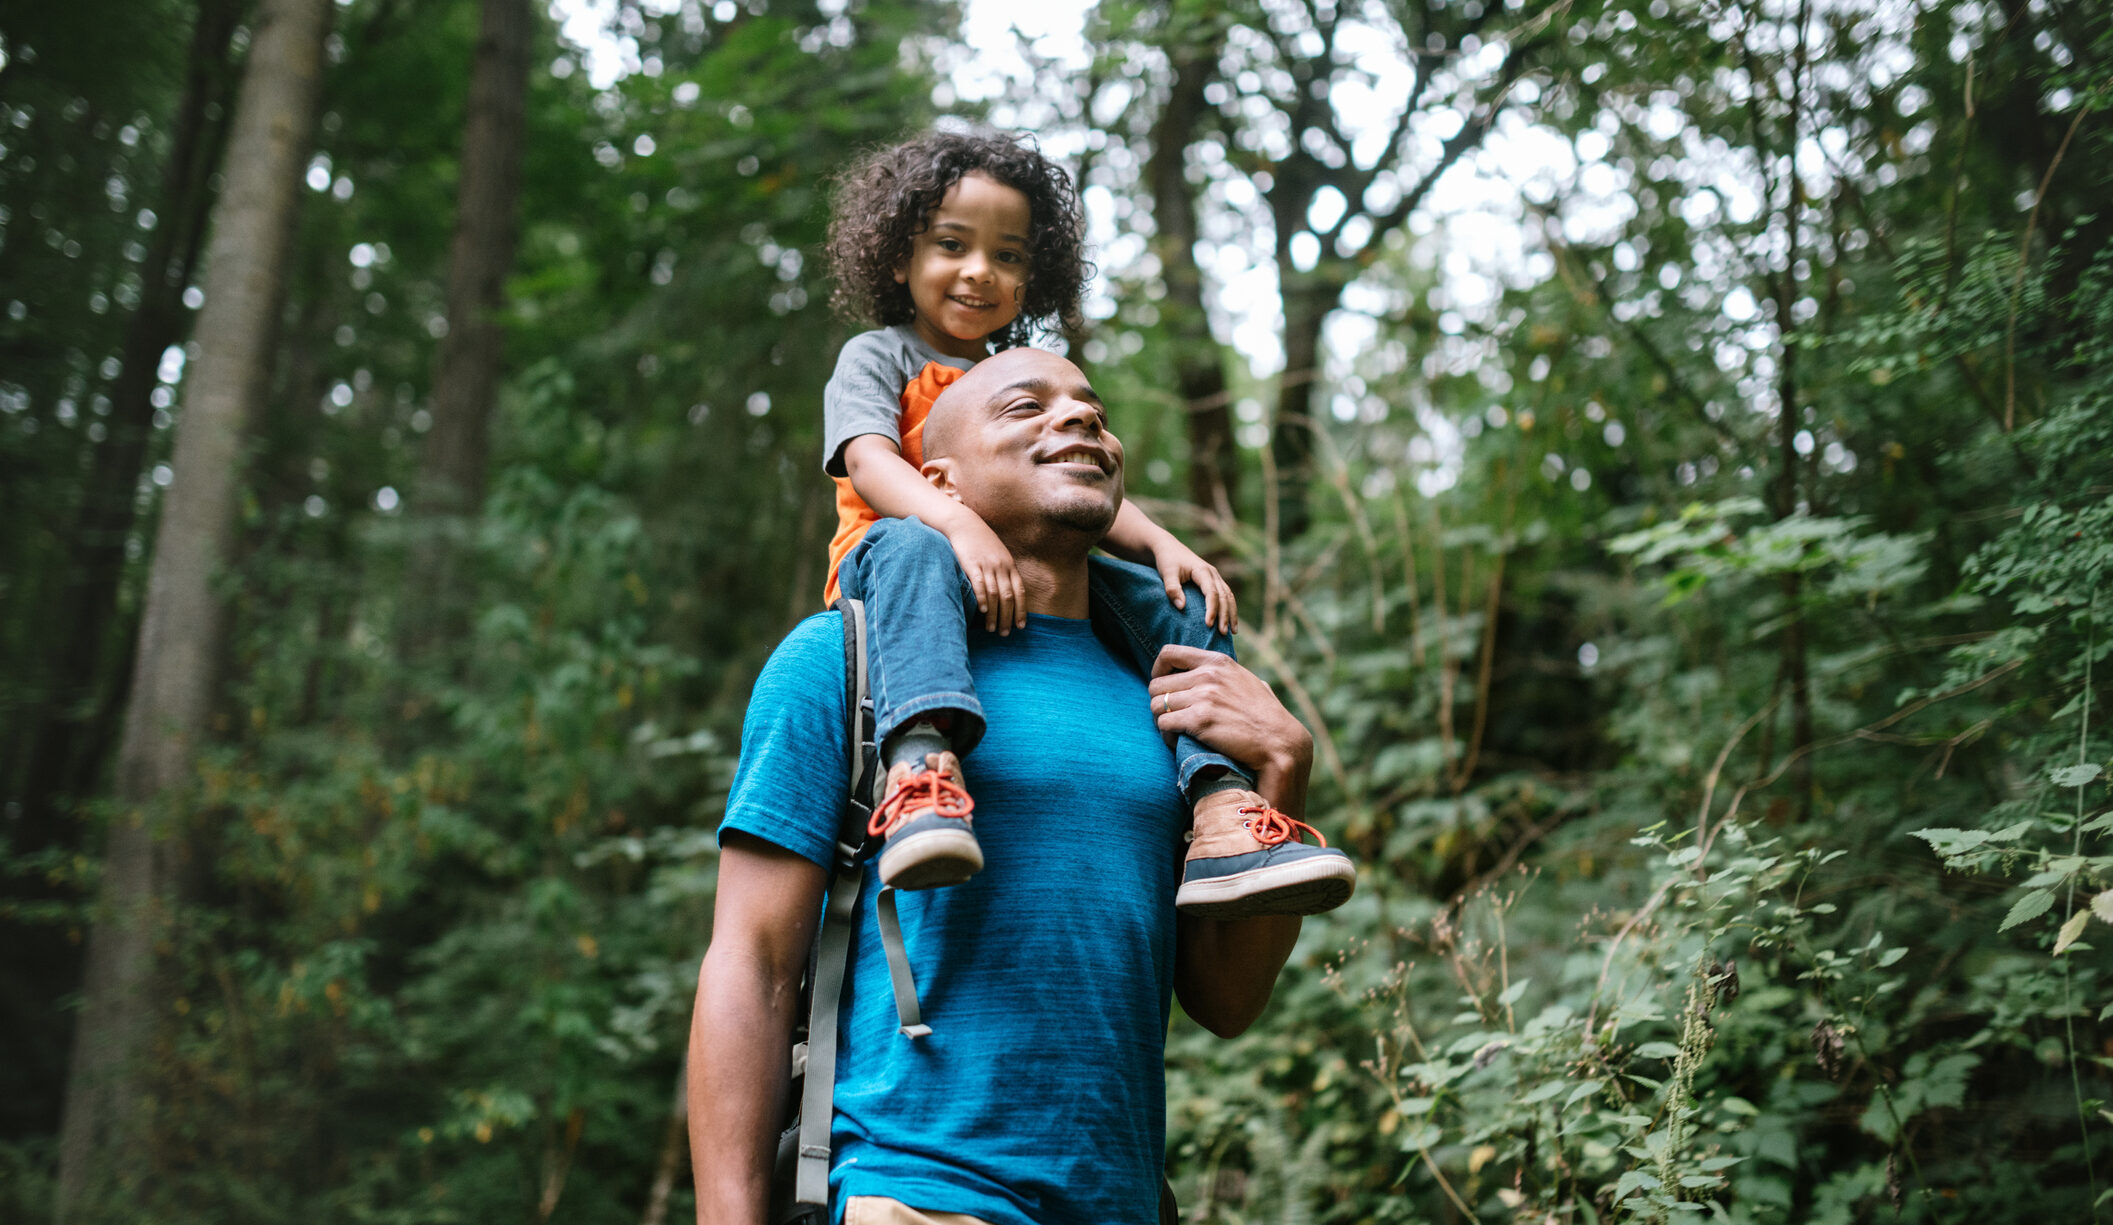 A father with medium-dark skin tones carrying his son on his shoulders through a forest.